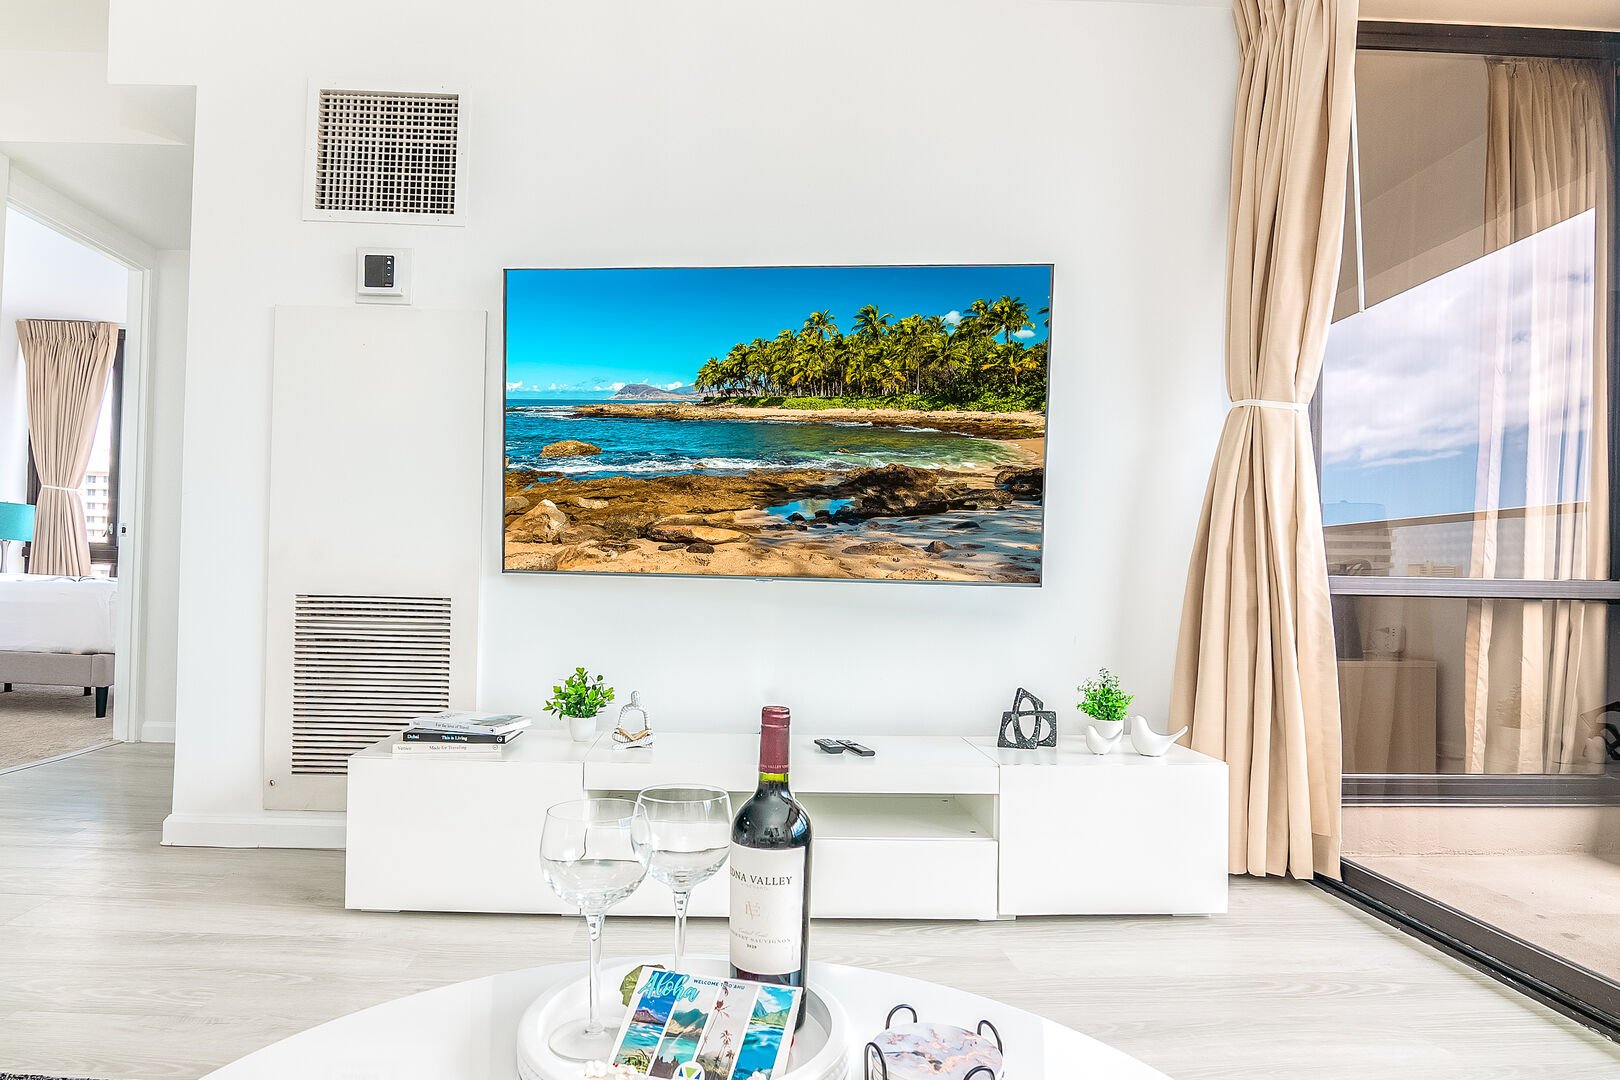 A 65'' Samsung Smart TV in your living room.